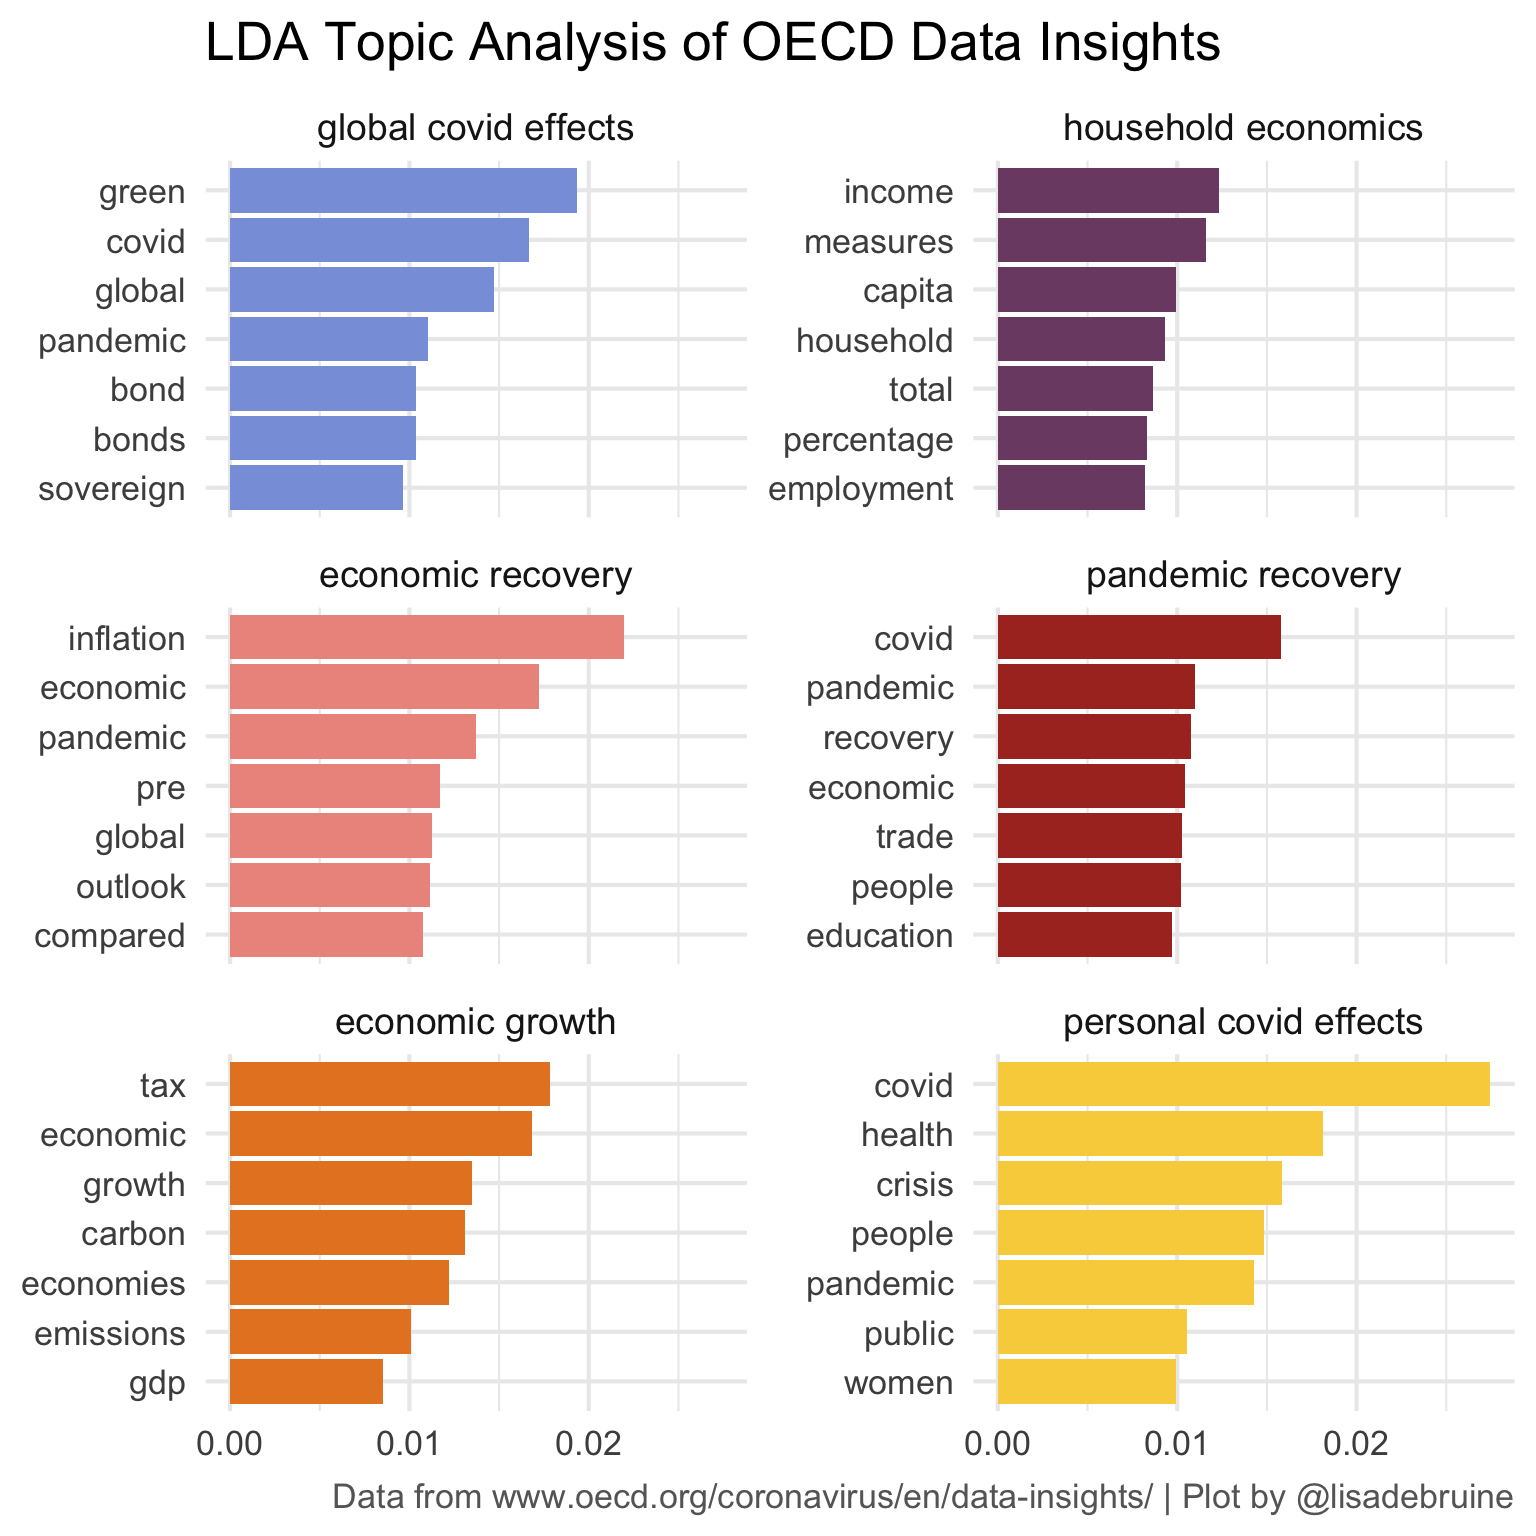 LDA Topic Analysis of OECD Data Insights -- A plot of six topics and their top 7 words -- global covid effects = green, covid, global, pandemic, bond, bonds, sovereign; household economics = income, measures, capita, household, total, percentage, employment; economic recovery = inflation, economic, pandemic, pre, global, outlook, compared; pandemic recovery = covid, pandemic, recovery, economic, trade, people, education; economic growth = tax, economic, growth, carbon, economies, emissions, gdp; personal covid effects = covid, health, crisis, people, pandemic, public, women